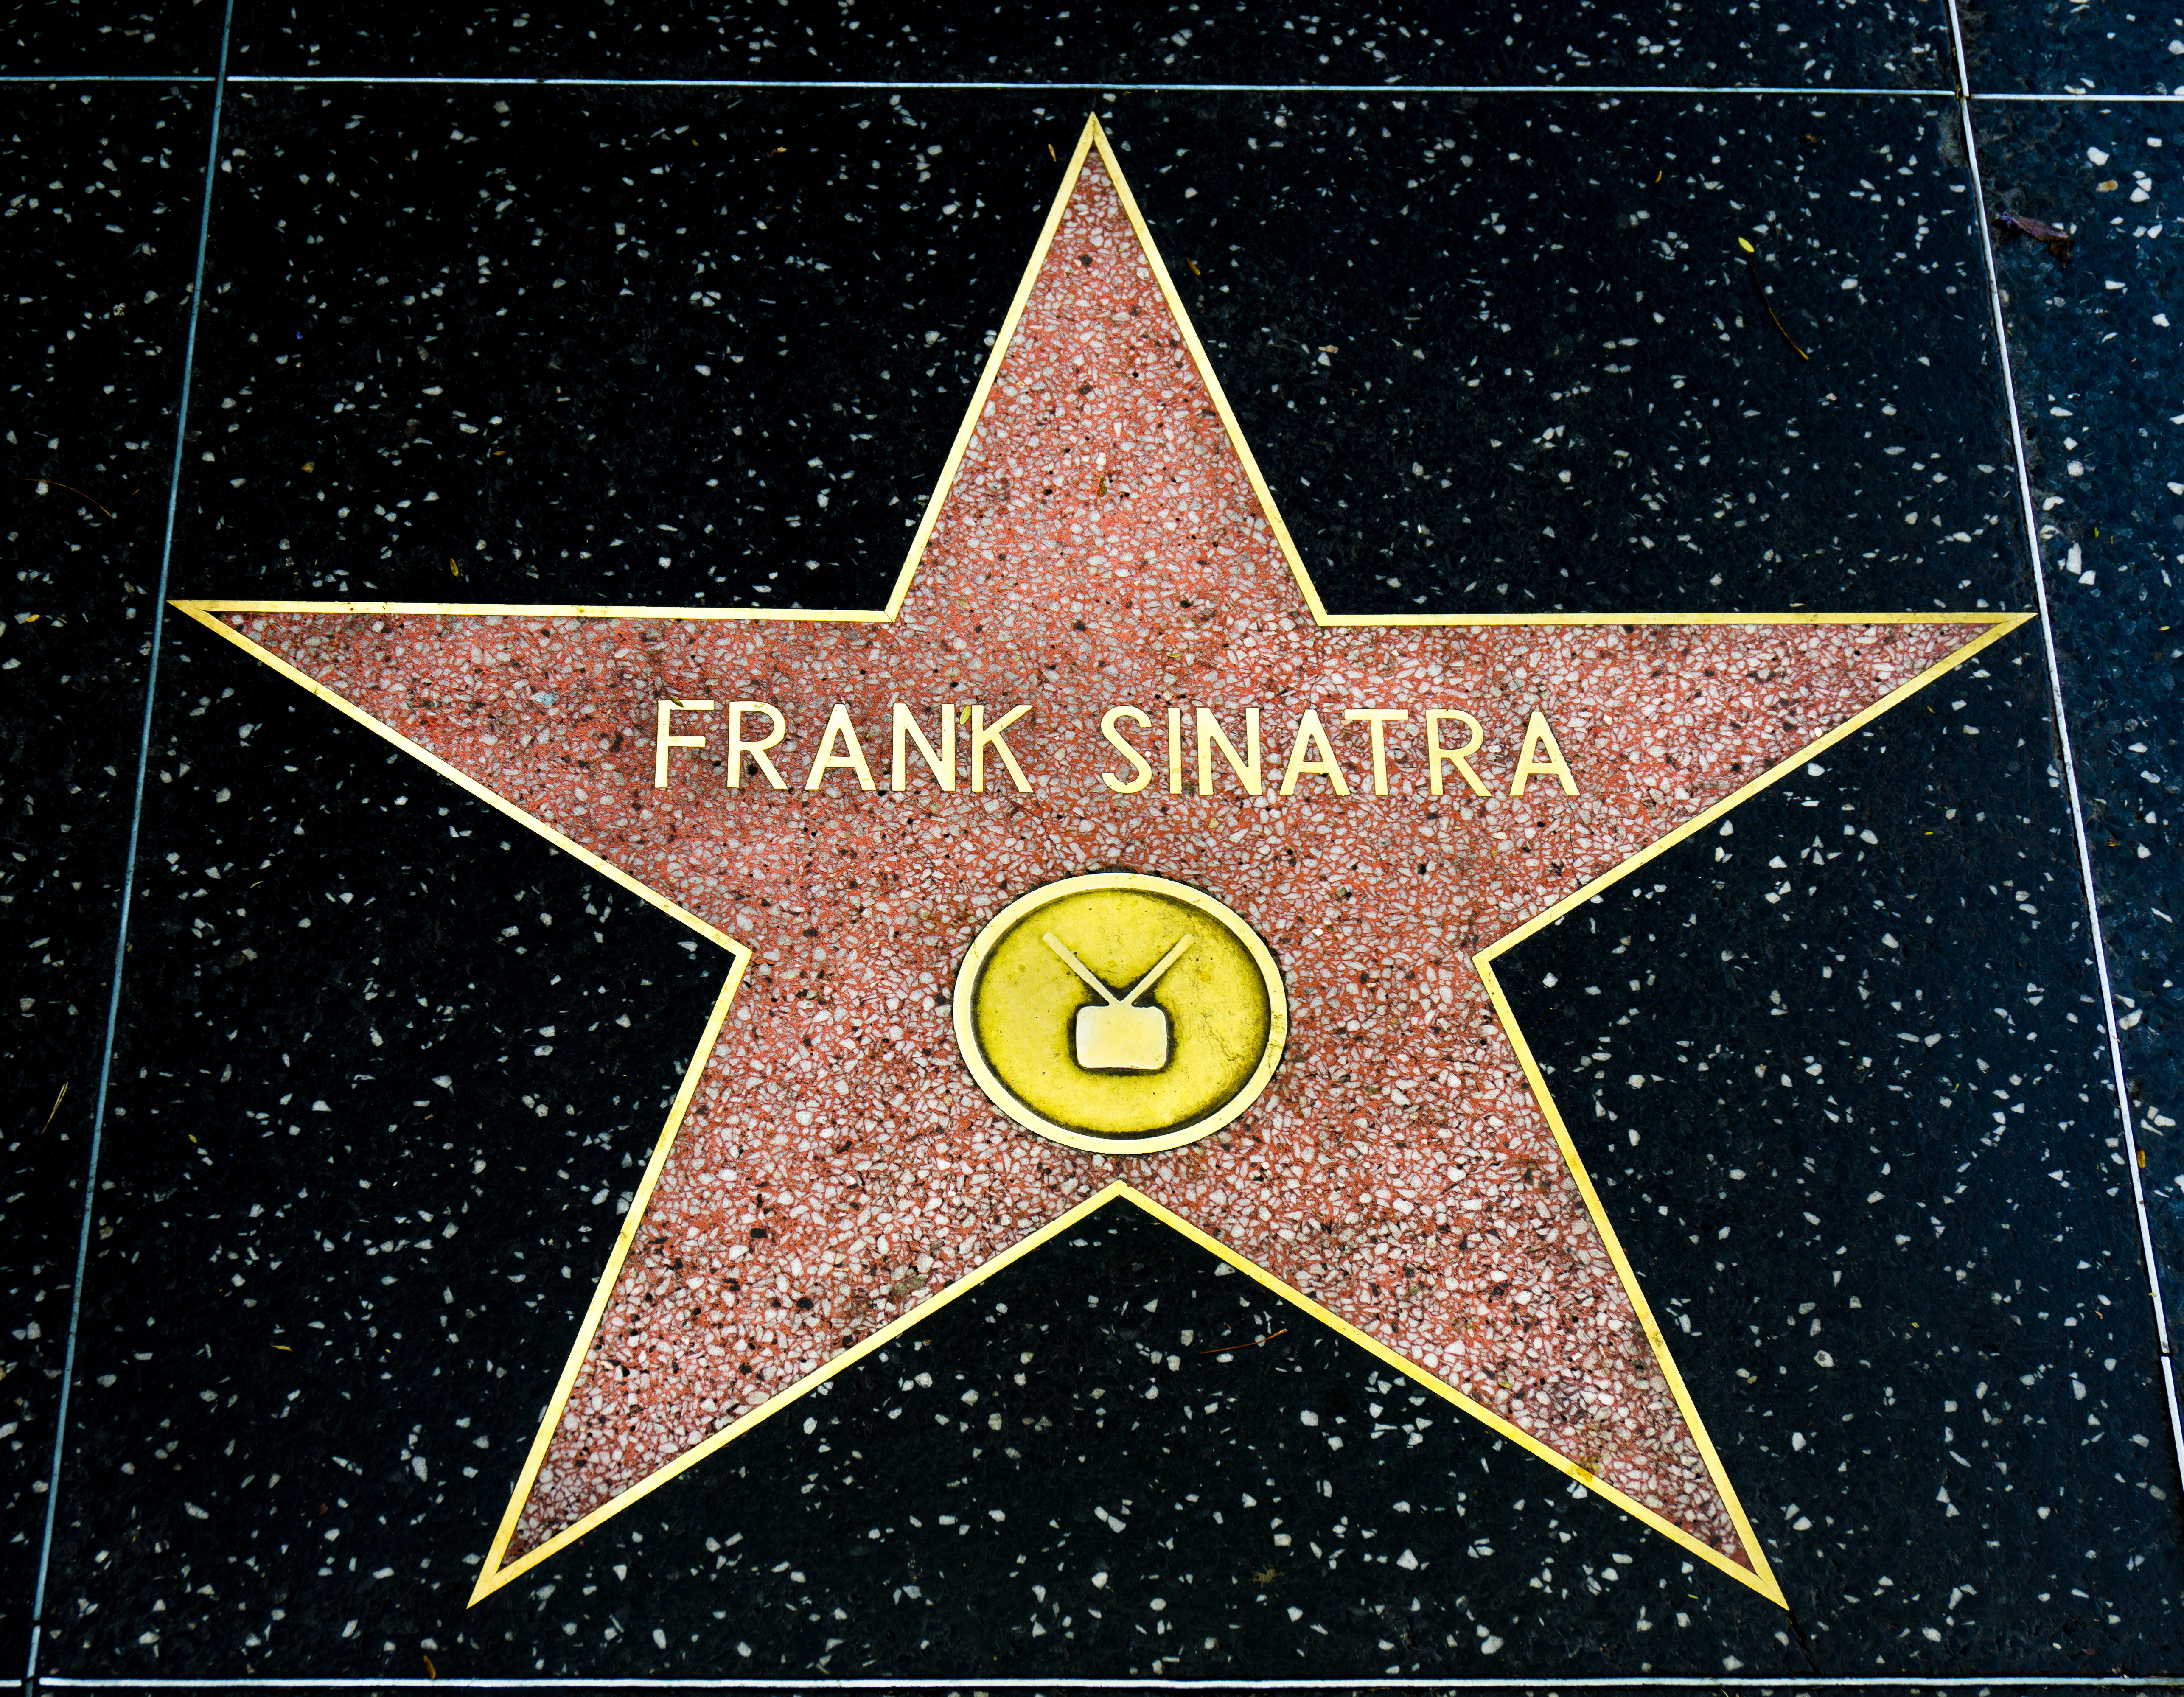 Frank Sinatra: Exploring the Genre and Legacy of a Music Icon